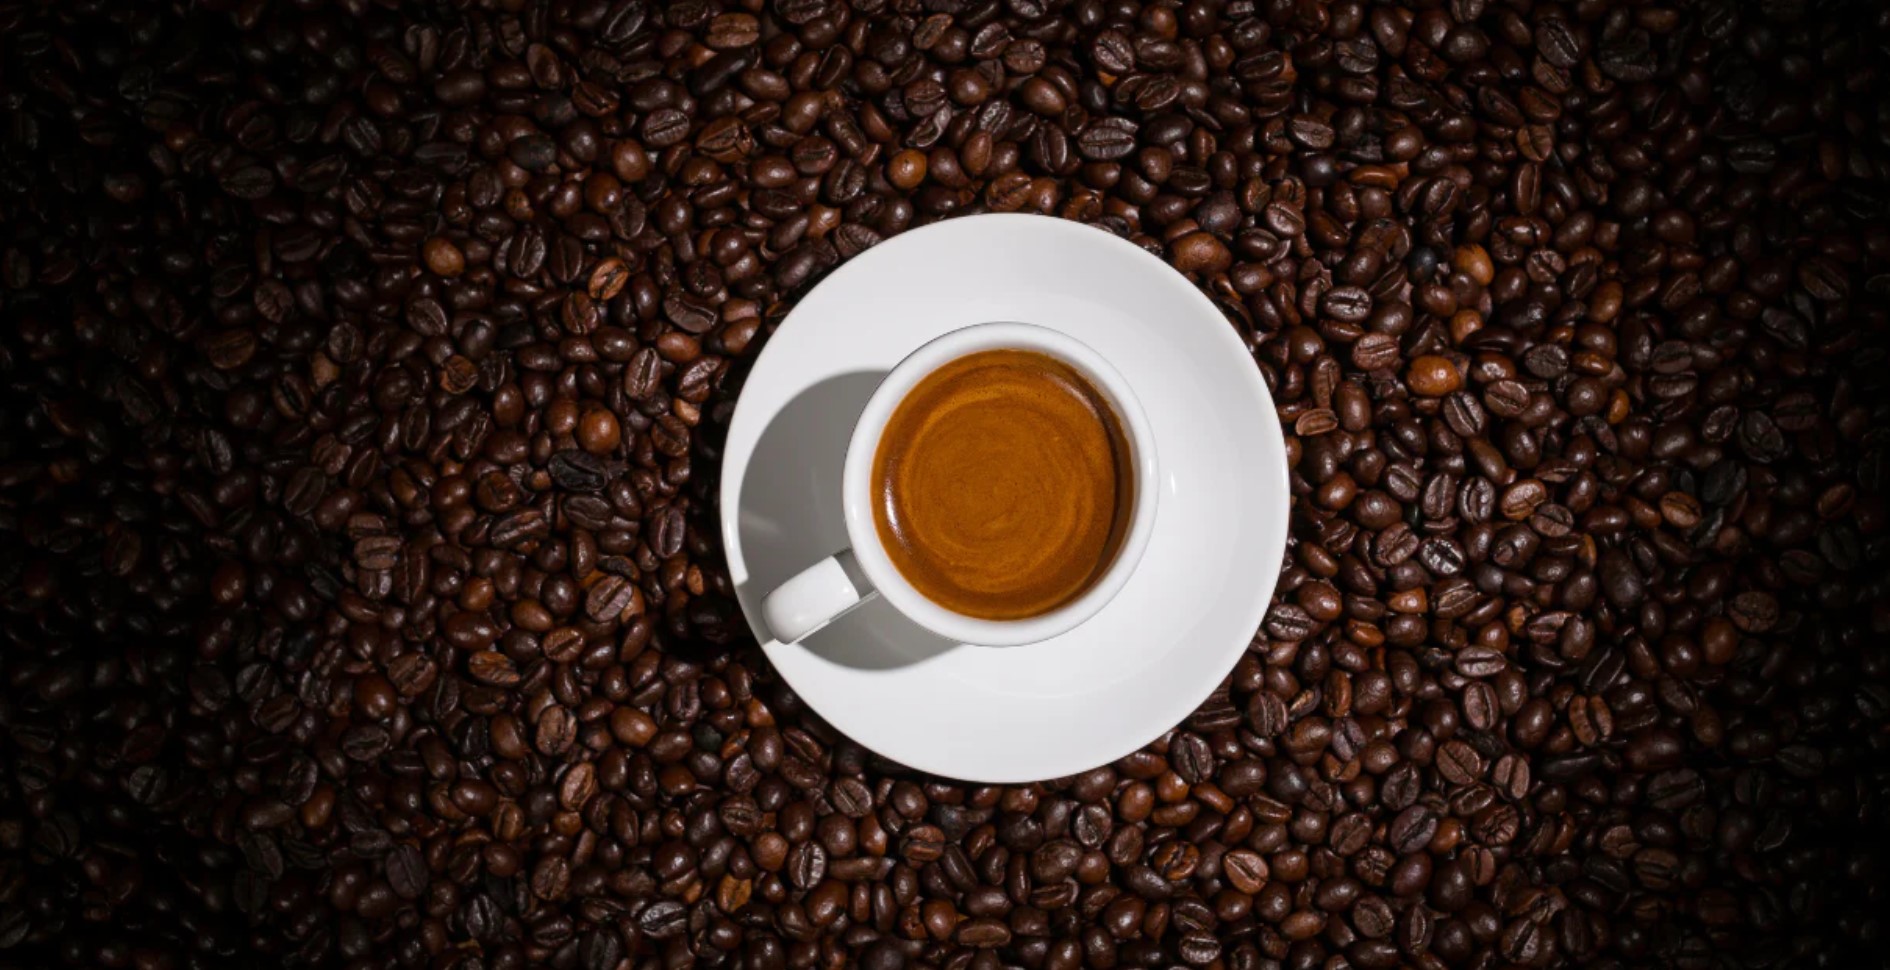 The Art of Espresso: From Ristretto to Lungo - Mastering the Shots